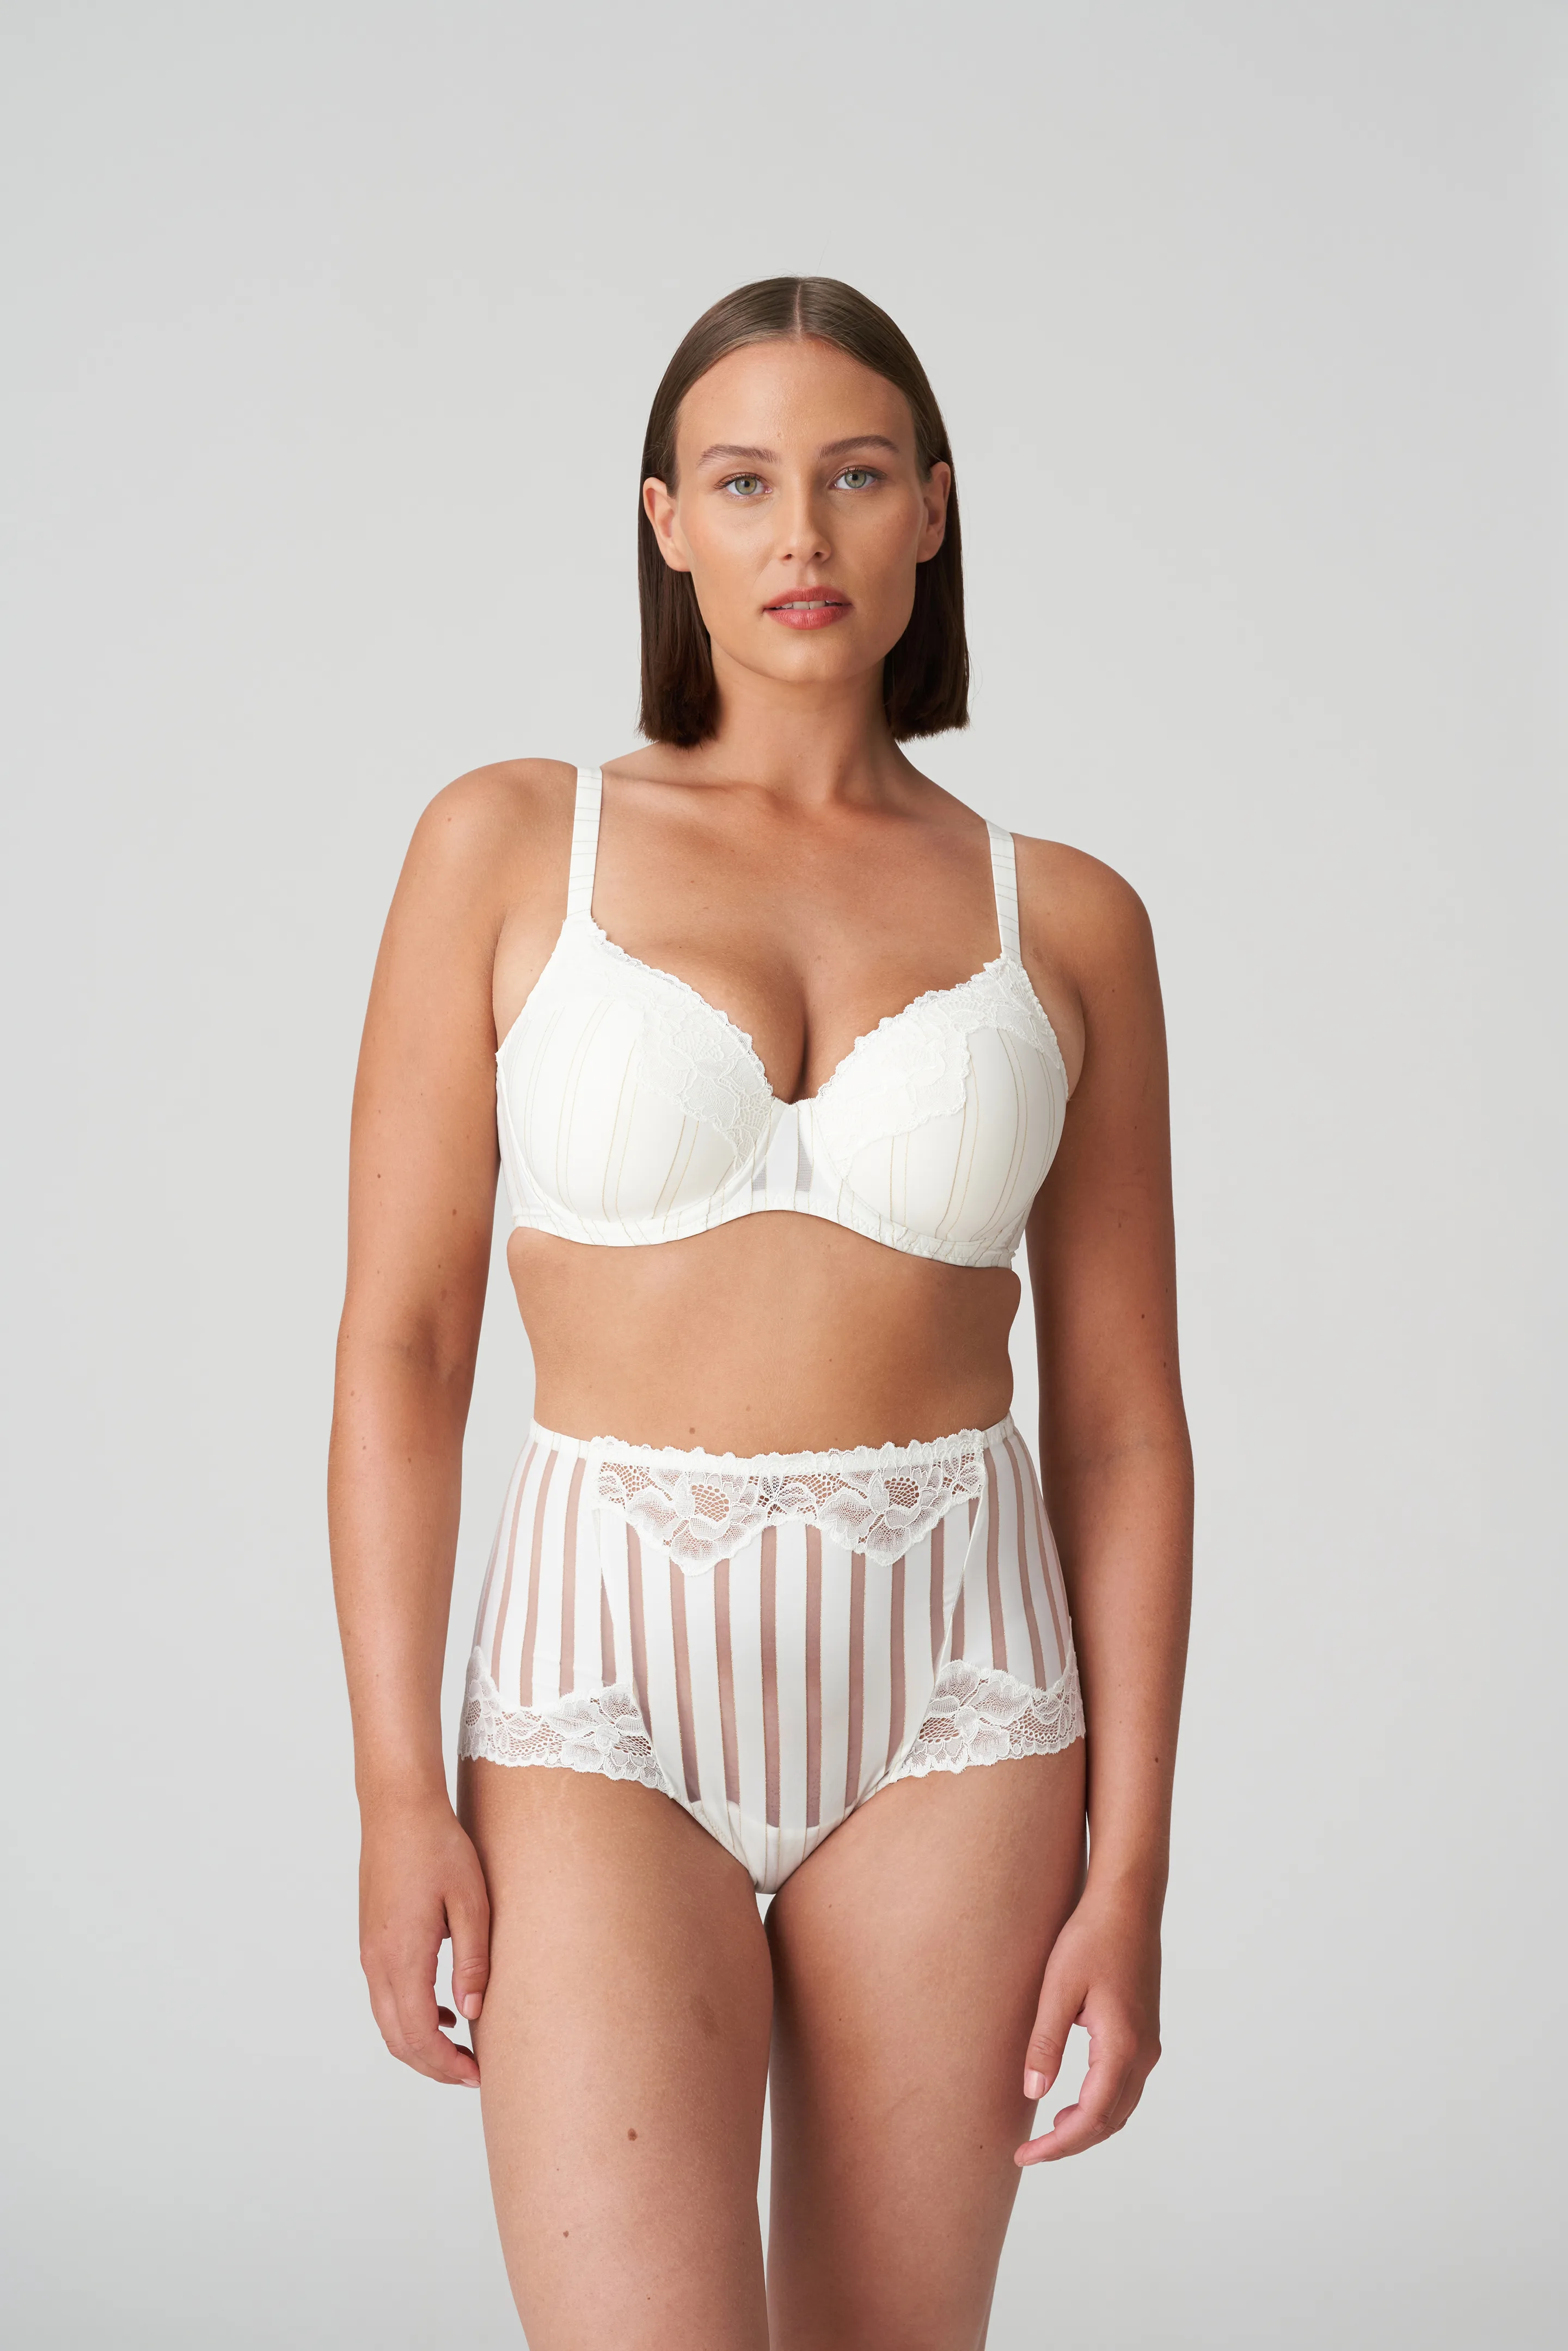 KISSES Plus Size Bra & Panty Set NWT Grey with Delicate Flower